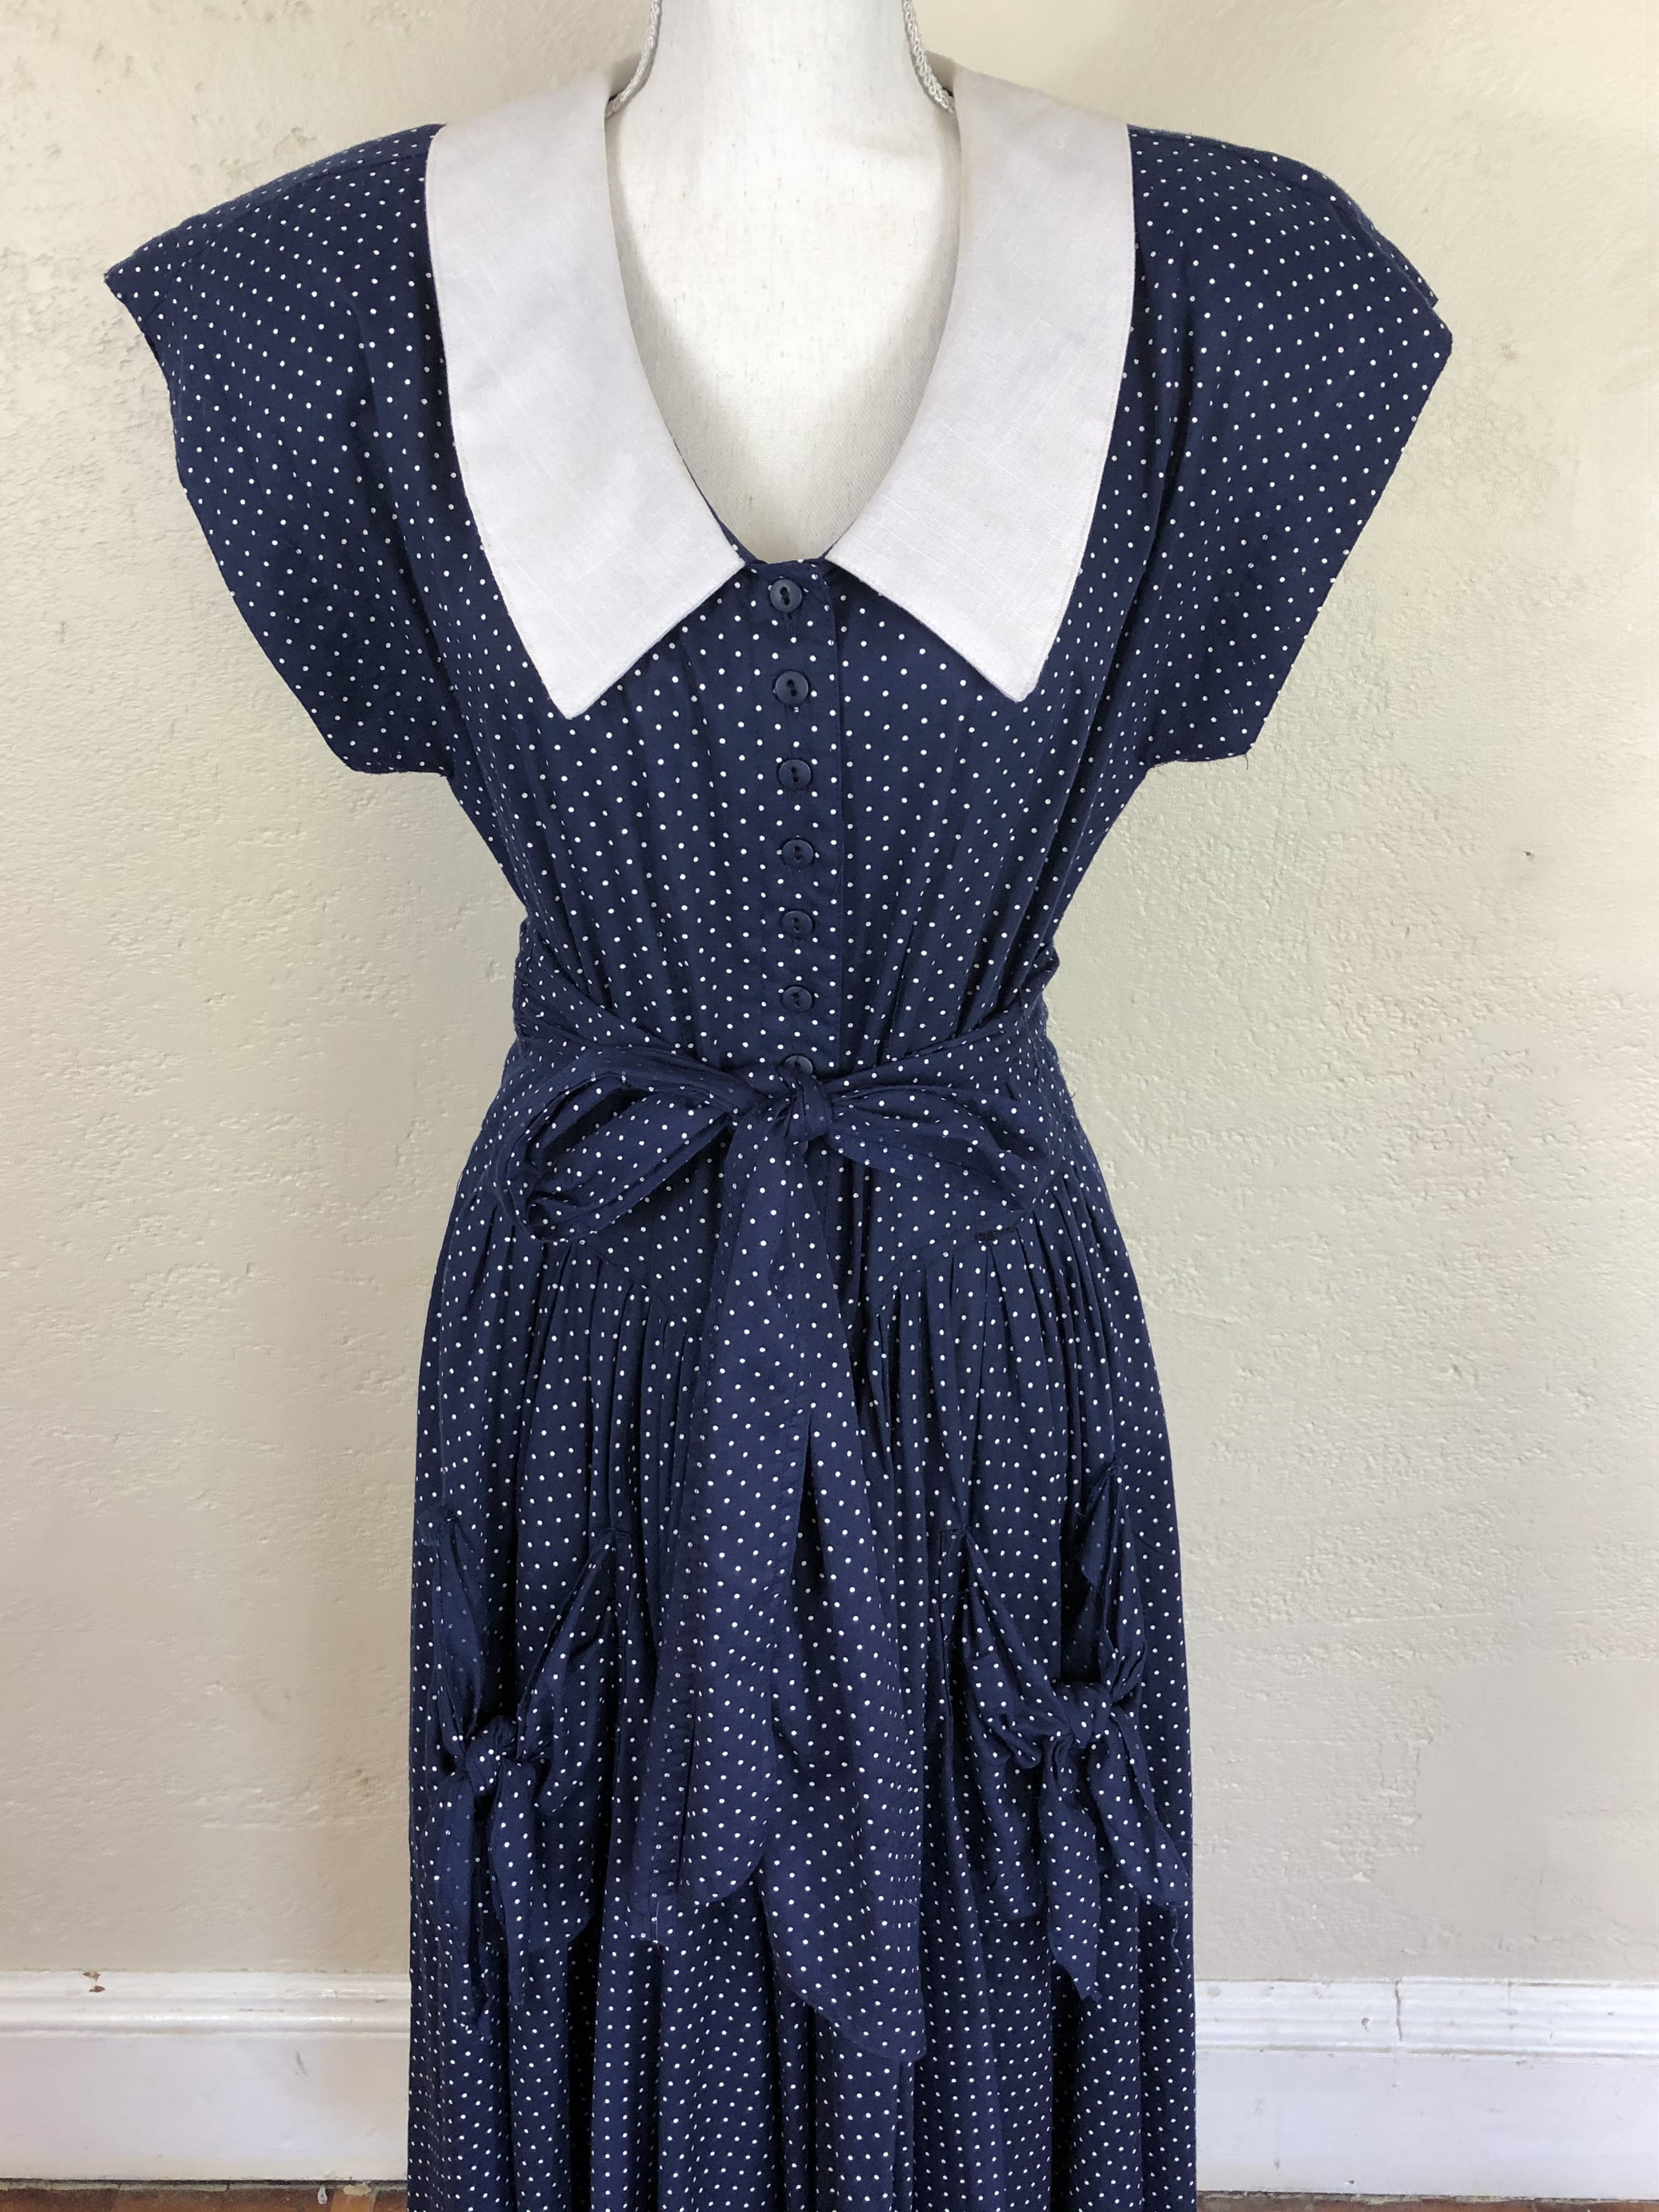 Vintage 80's Navy Polka Dot Dress by Robbie Bee | Shop THRILLING